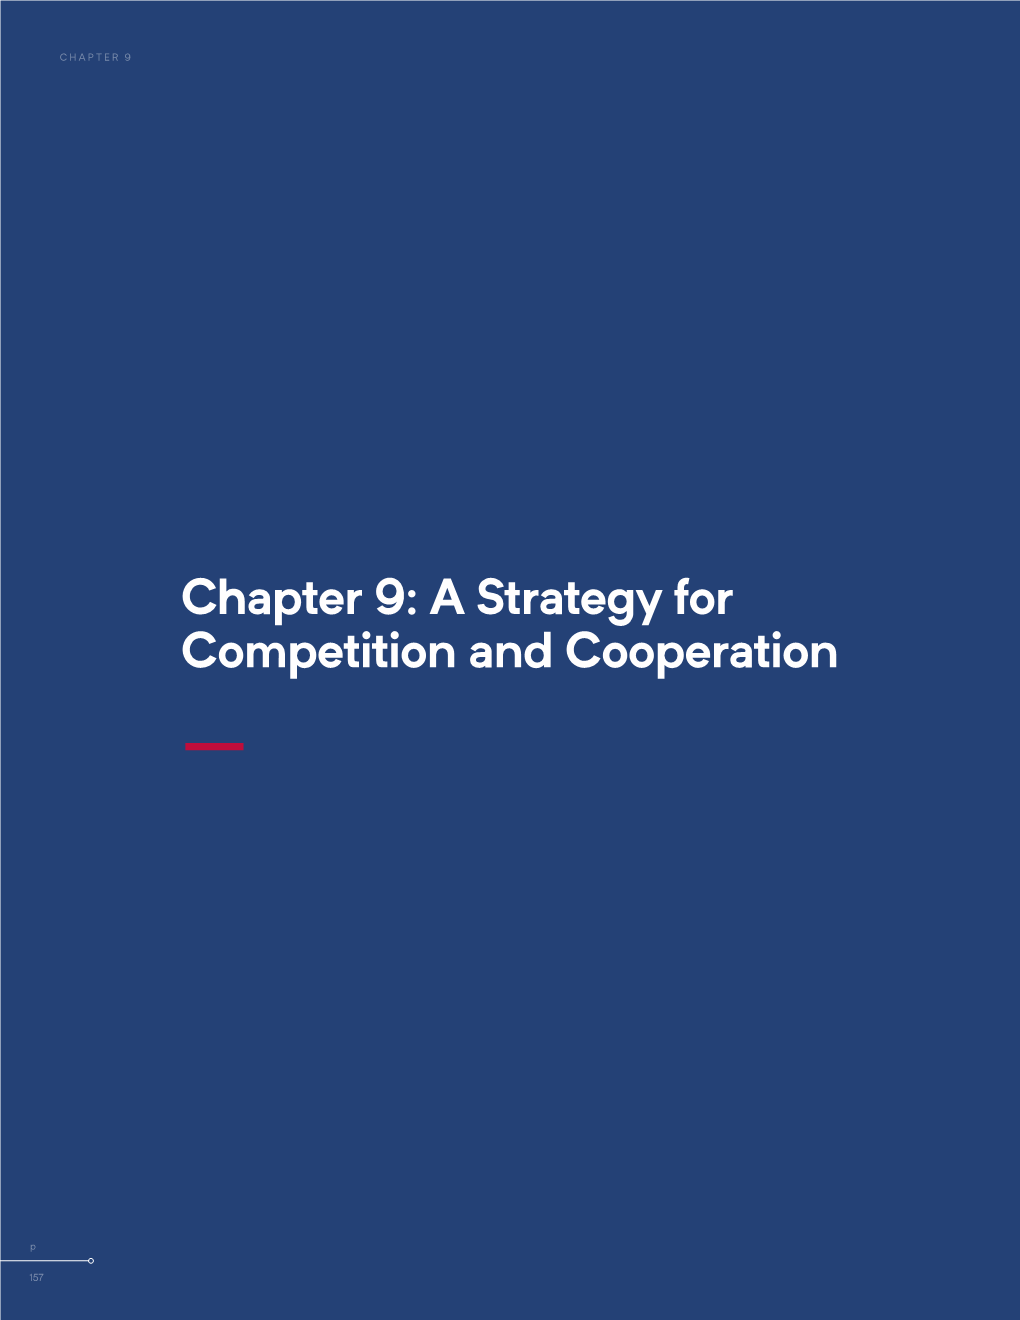 A Strategy for Competition and Cooperation